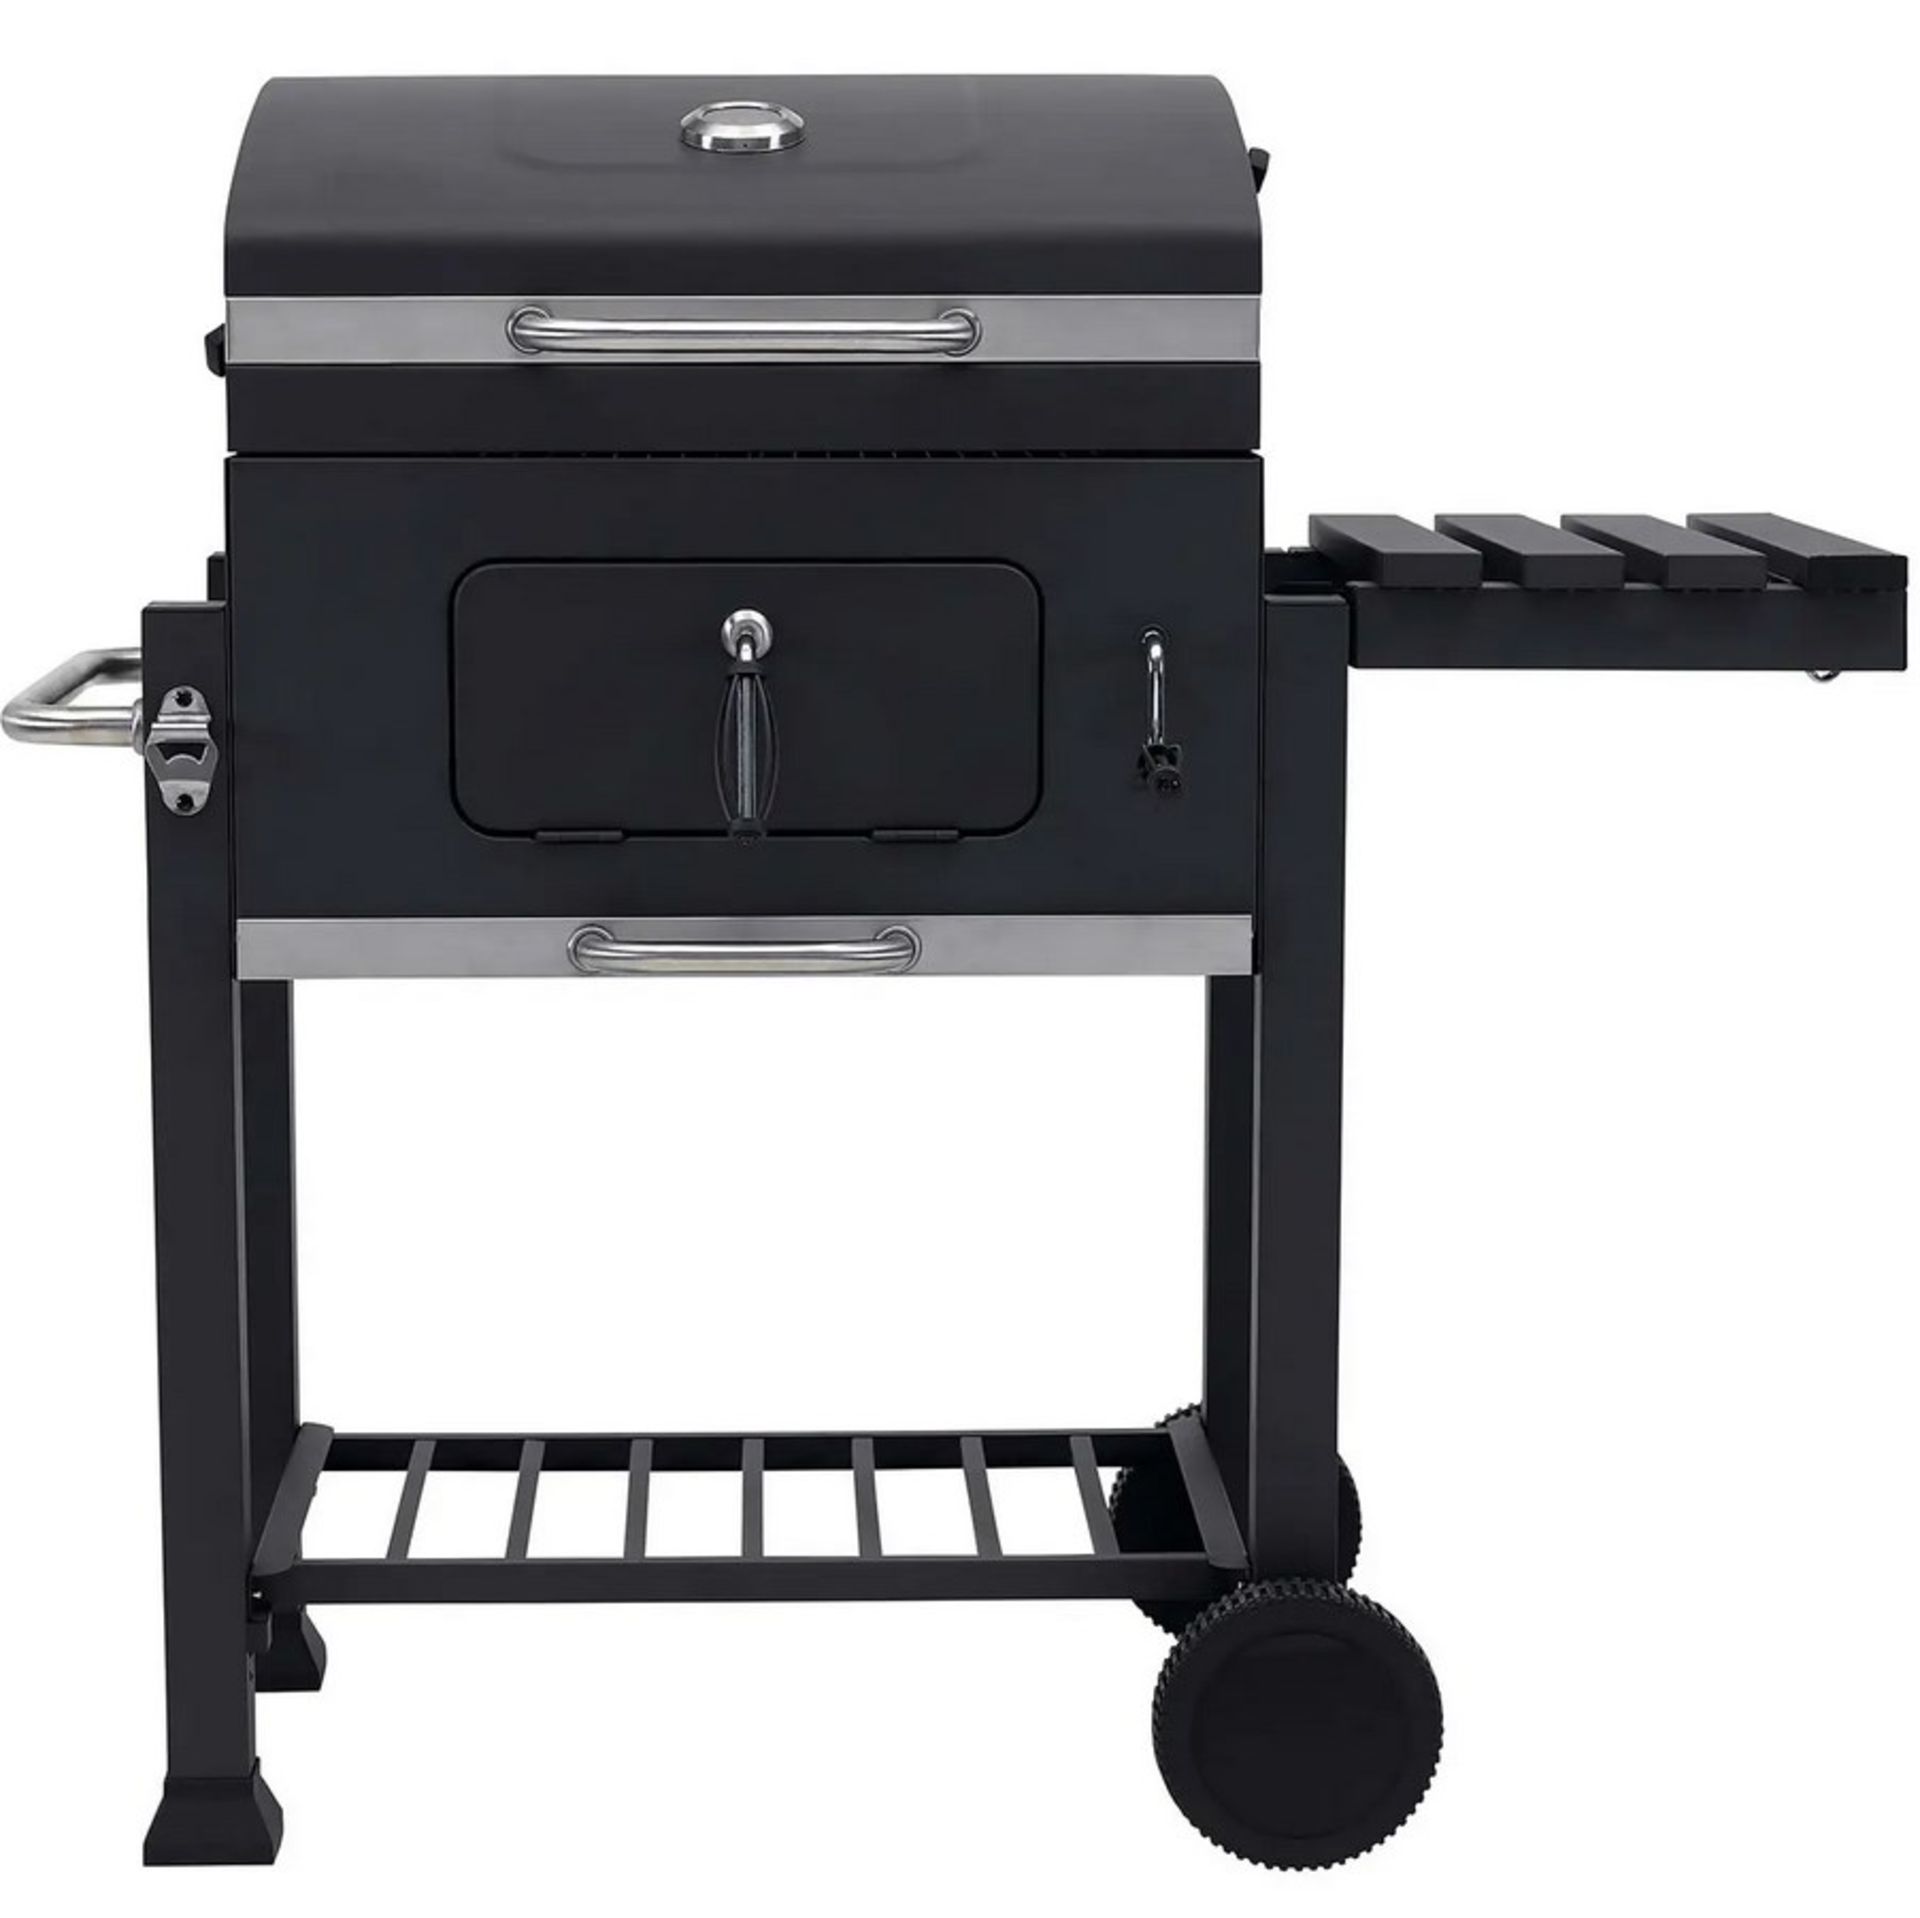 (58/Mez/P2) RRP £180. Texas Franklin Charcoal BBQ. Grid In Grid System For Easy Removal Of Centra... - Image 3 of 6